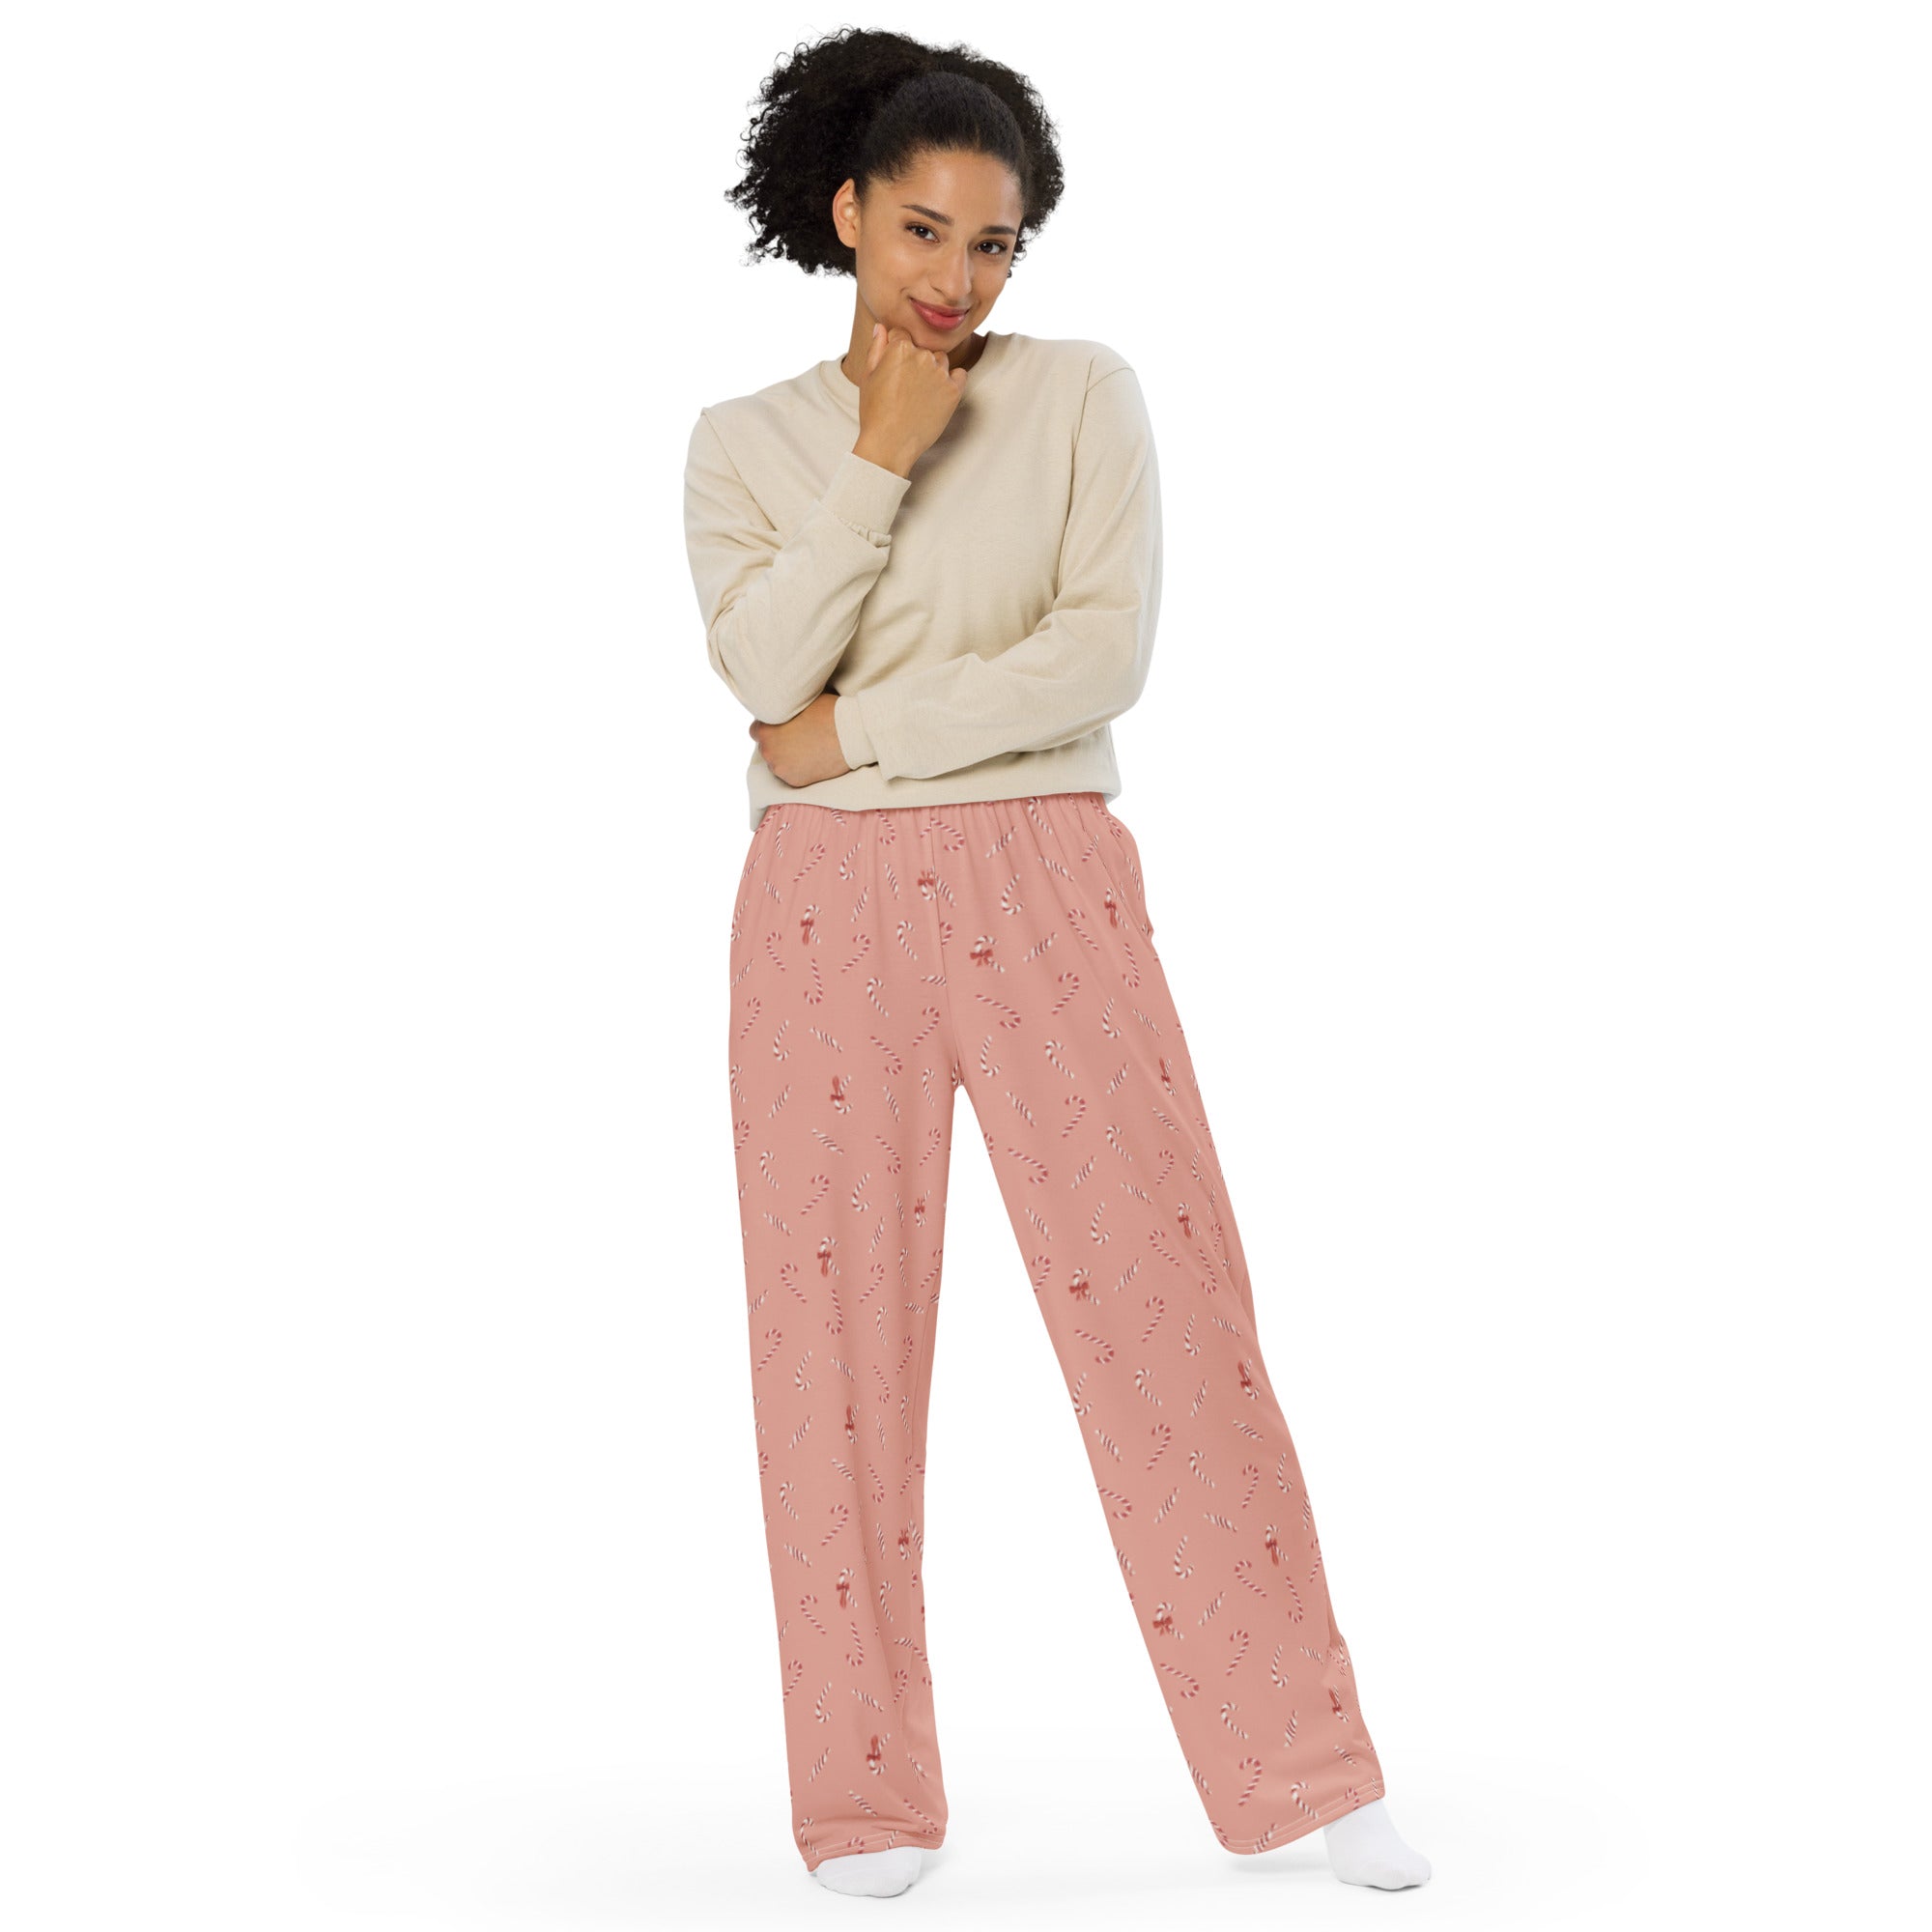 Holiday Candy Cane Bows unisex wide-leg pants